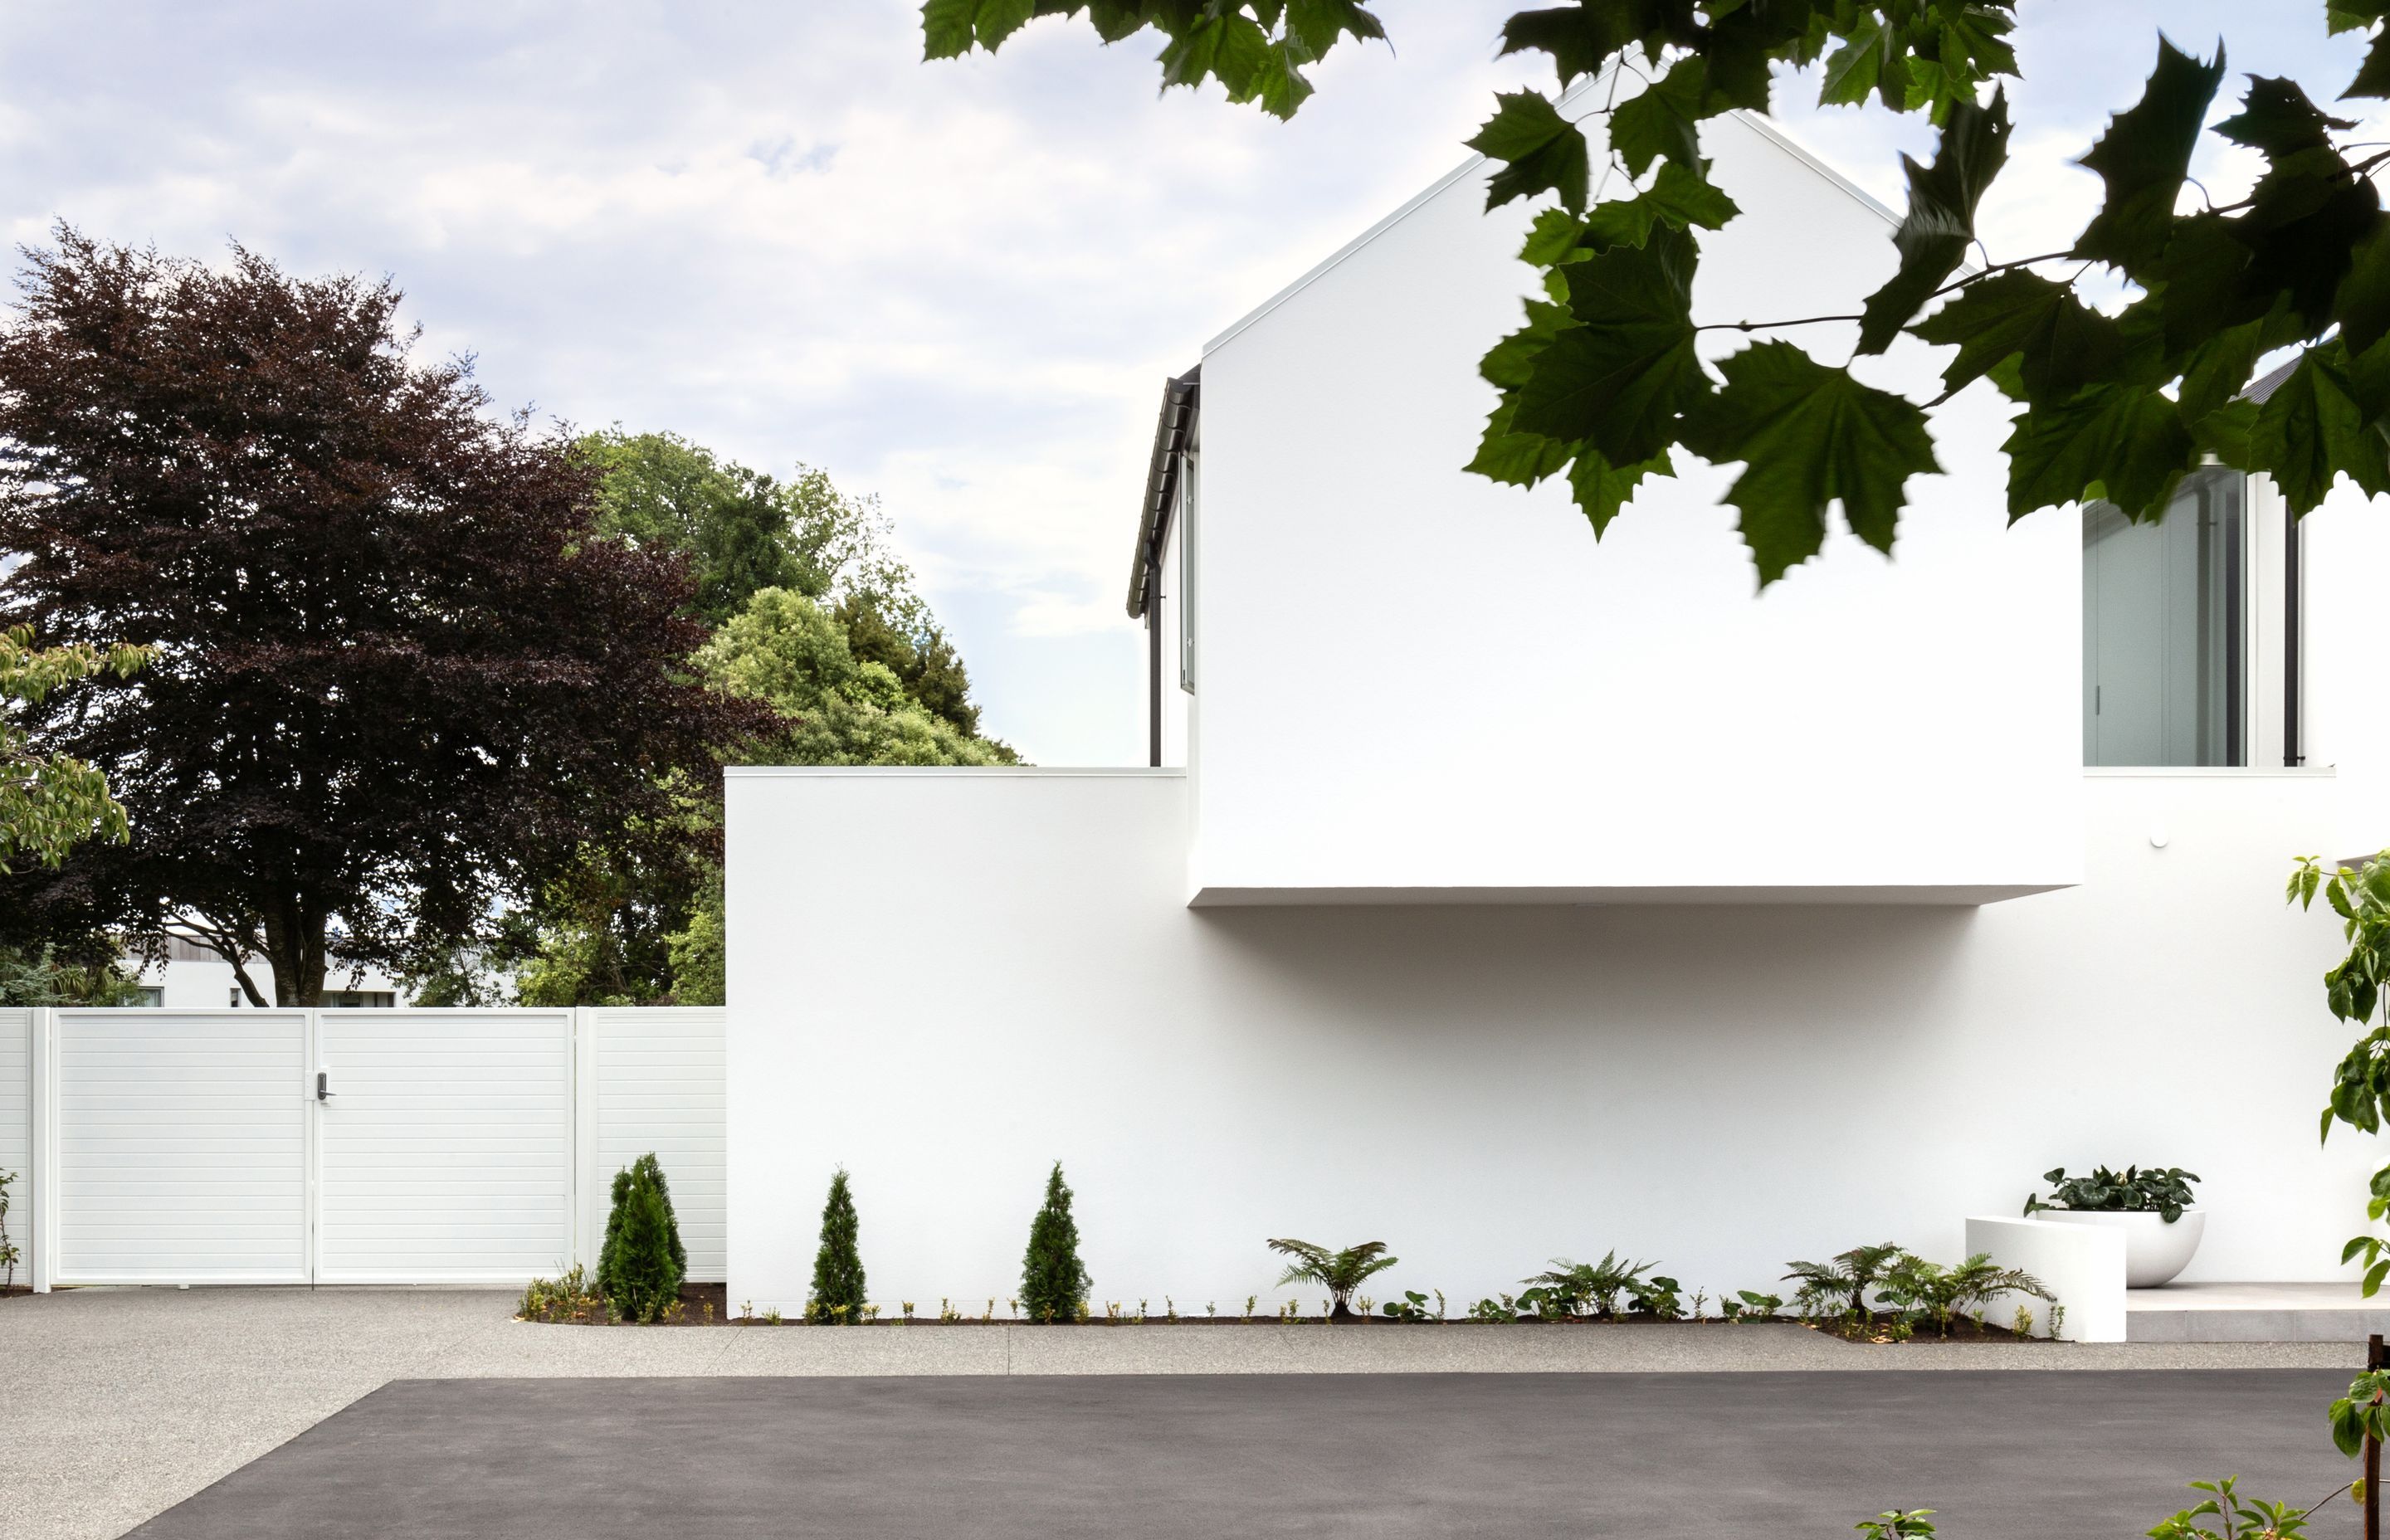 The single tone white plaster finish creates a cohesiveness to the different shapes of the home's form.